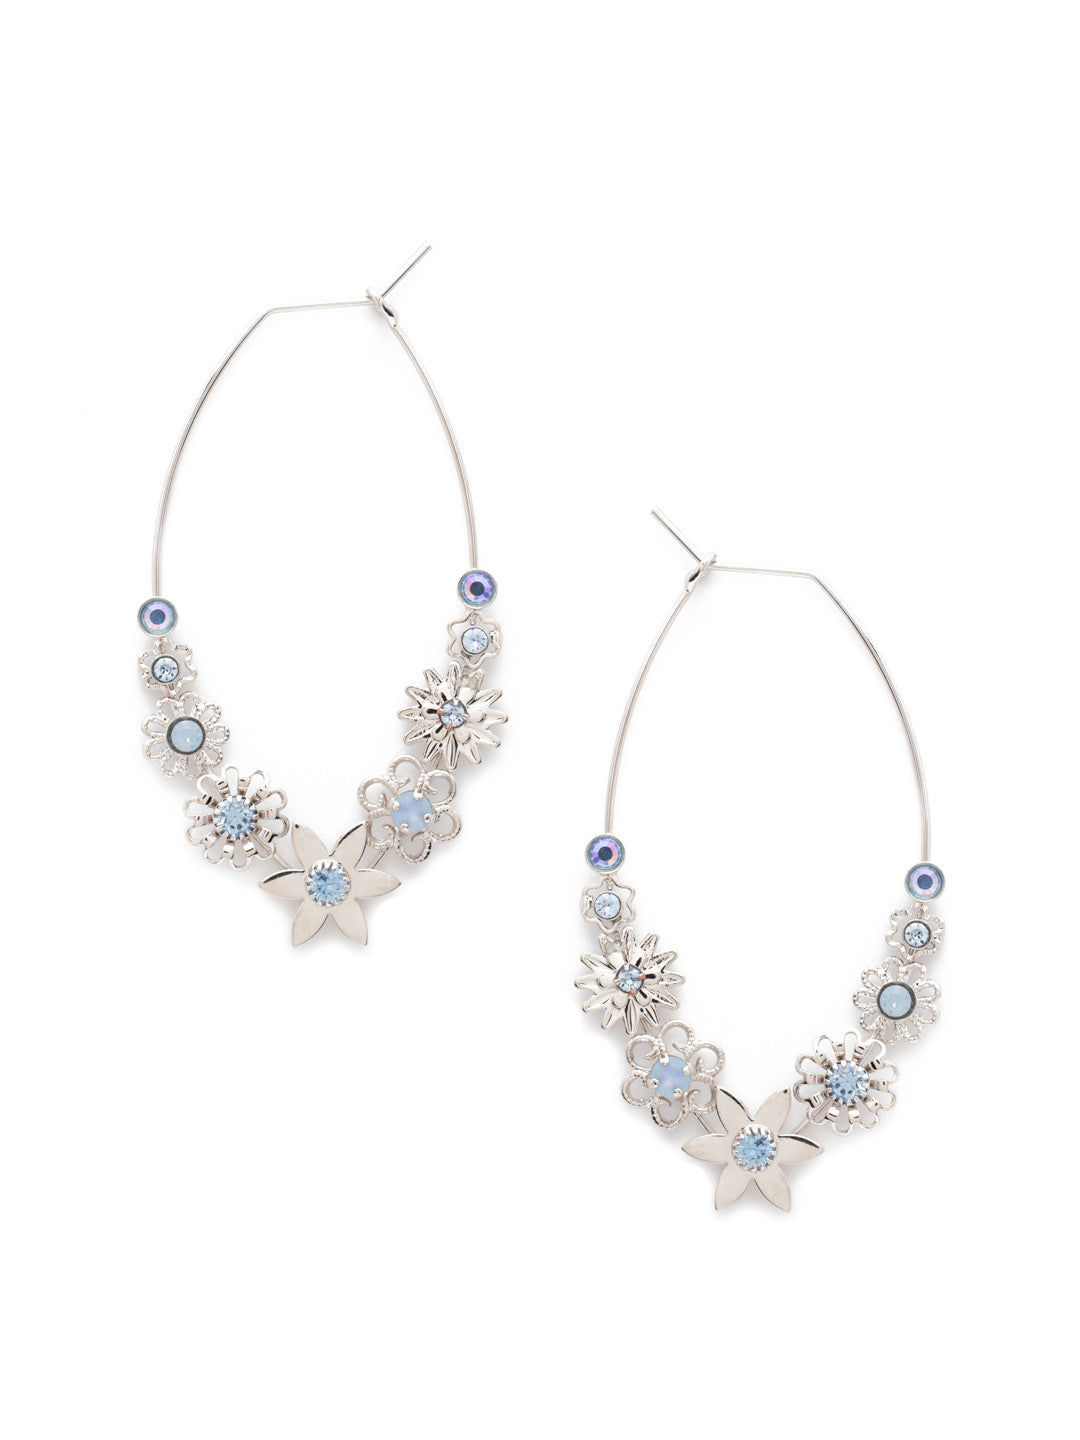 Fayette Hoop Earrings - EEV11PDWNB - <p>Our Fayette Hoop Earrings are floral metallic beauties accented with the Sorrelli crystal sparkle you know and love. From Sorrelli's Windsor Blue collection in our Palladium finish.</p>